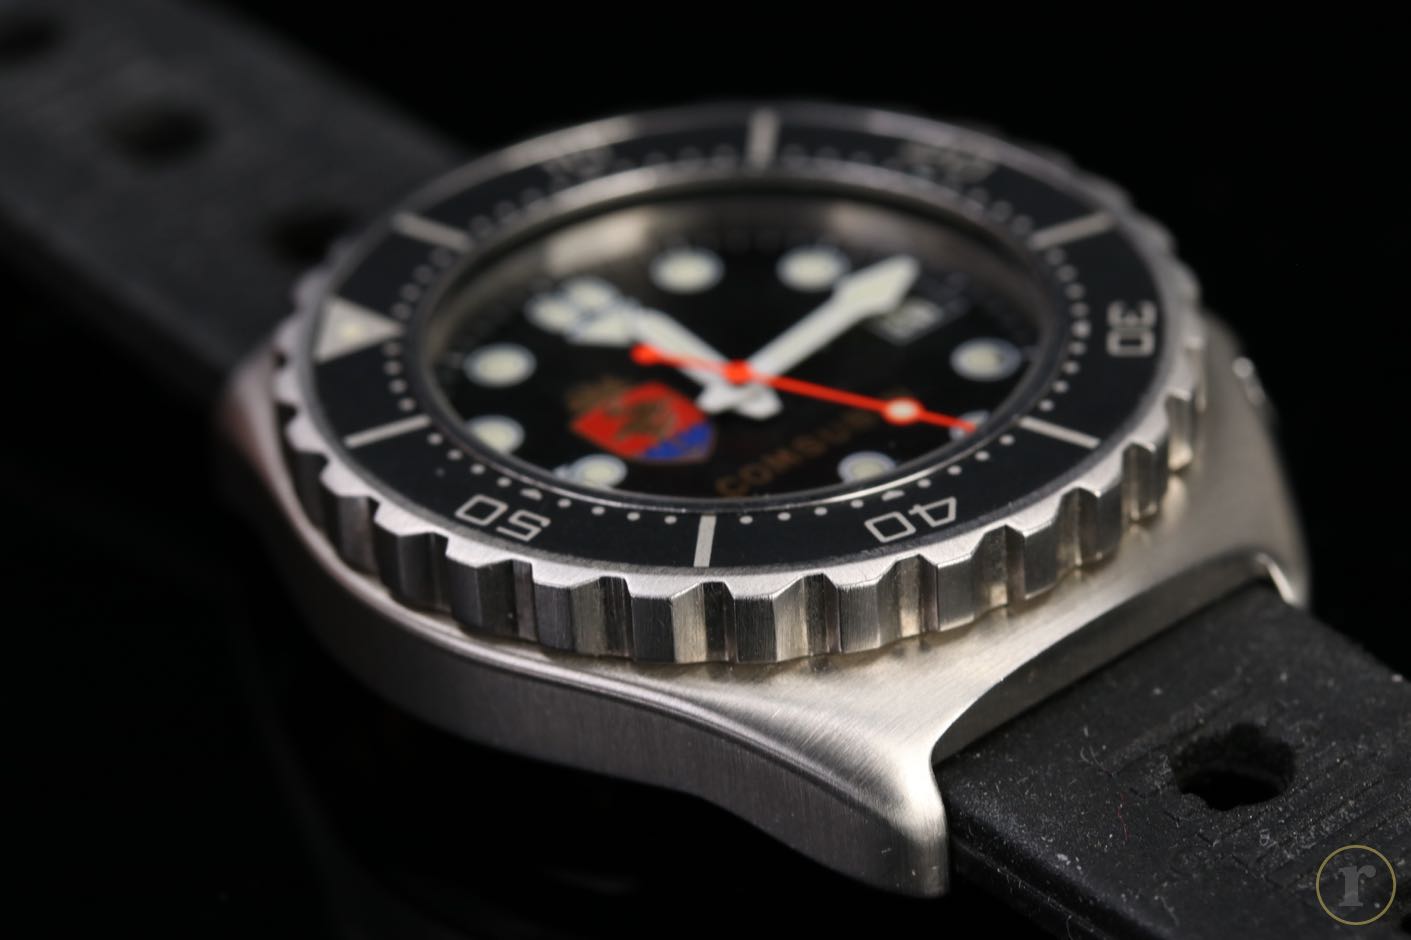 ratisbon's | Comsubin - wristwatch for military elite divers from the ...